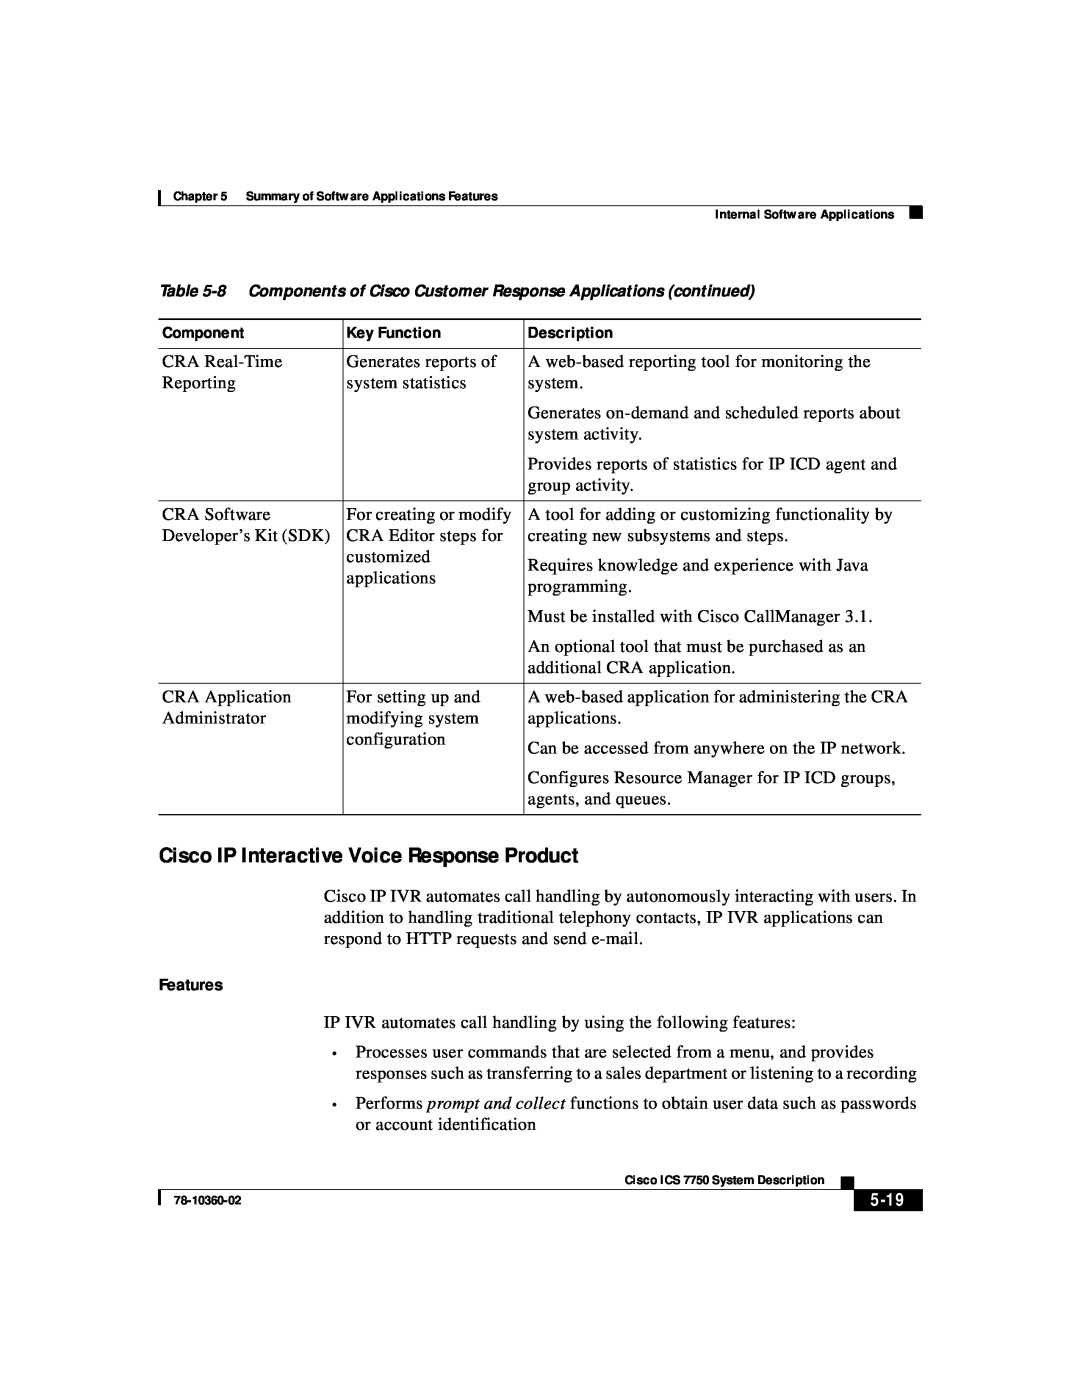 Cisco Systems ICS-7750 manual Cisco IP Interactive Voice Response Product, Features, 5-19 